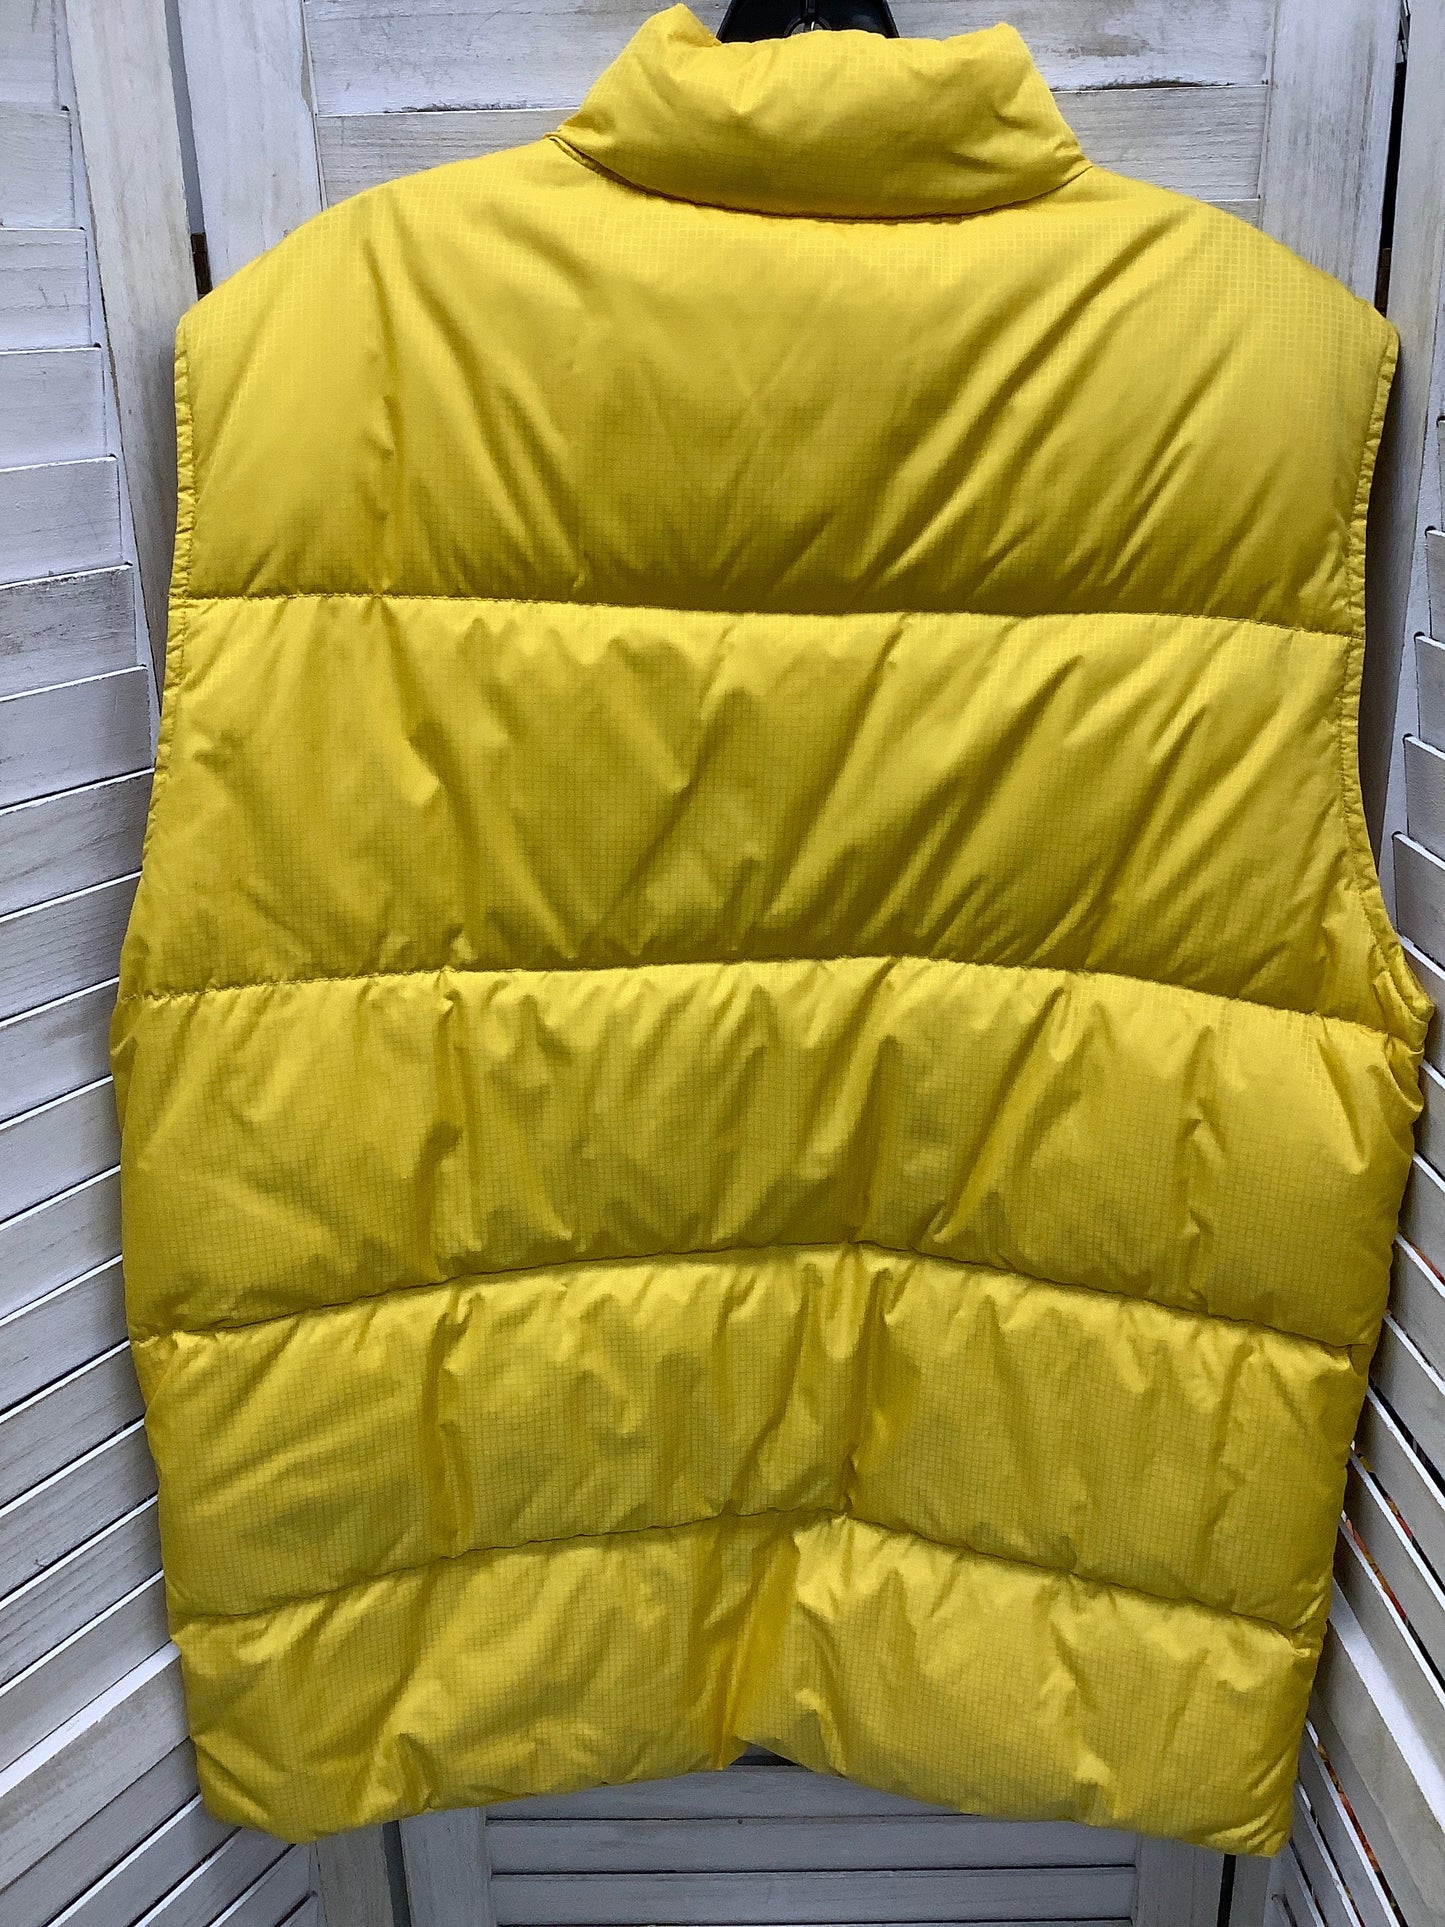 Vest Puffer & Quilted By Lands End  Size: Xl